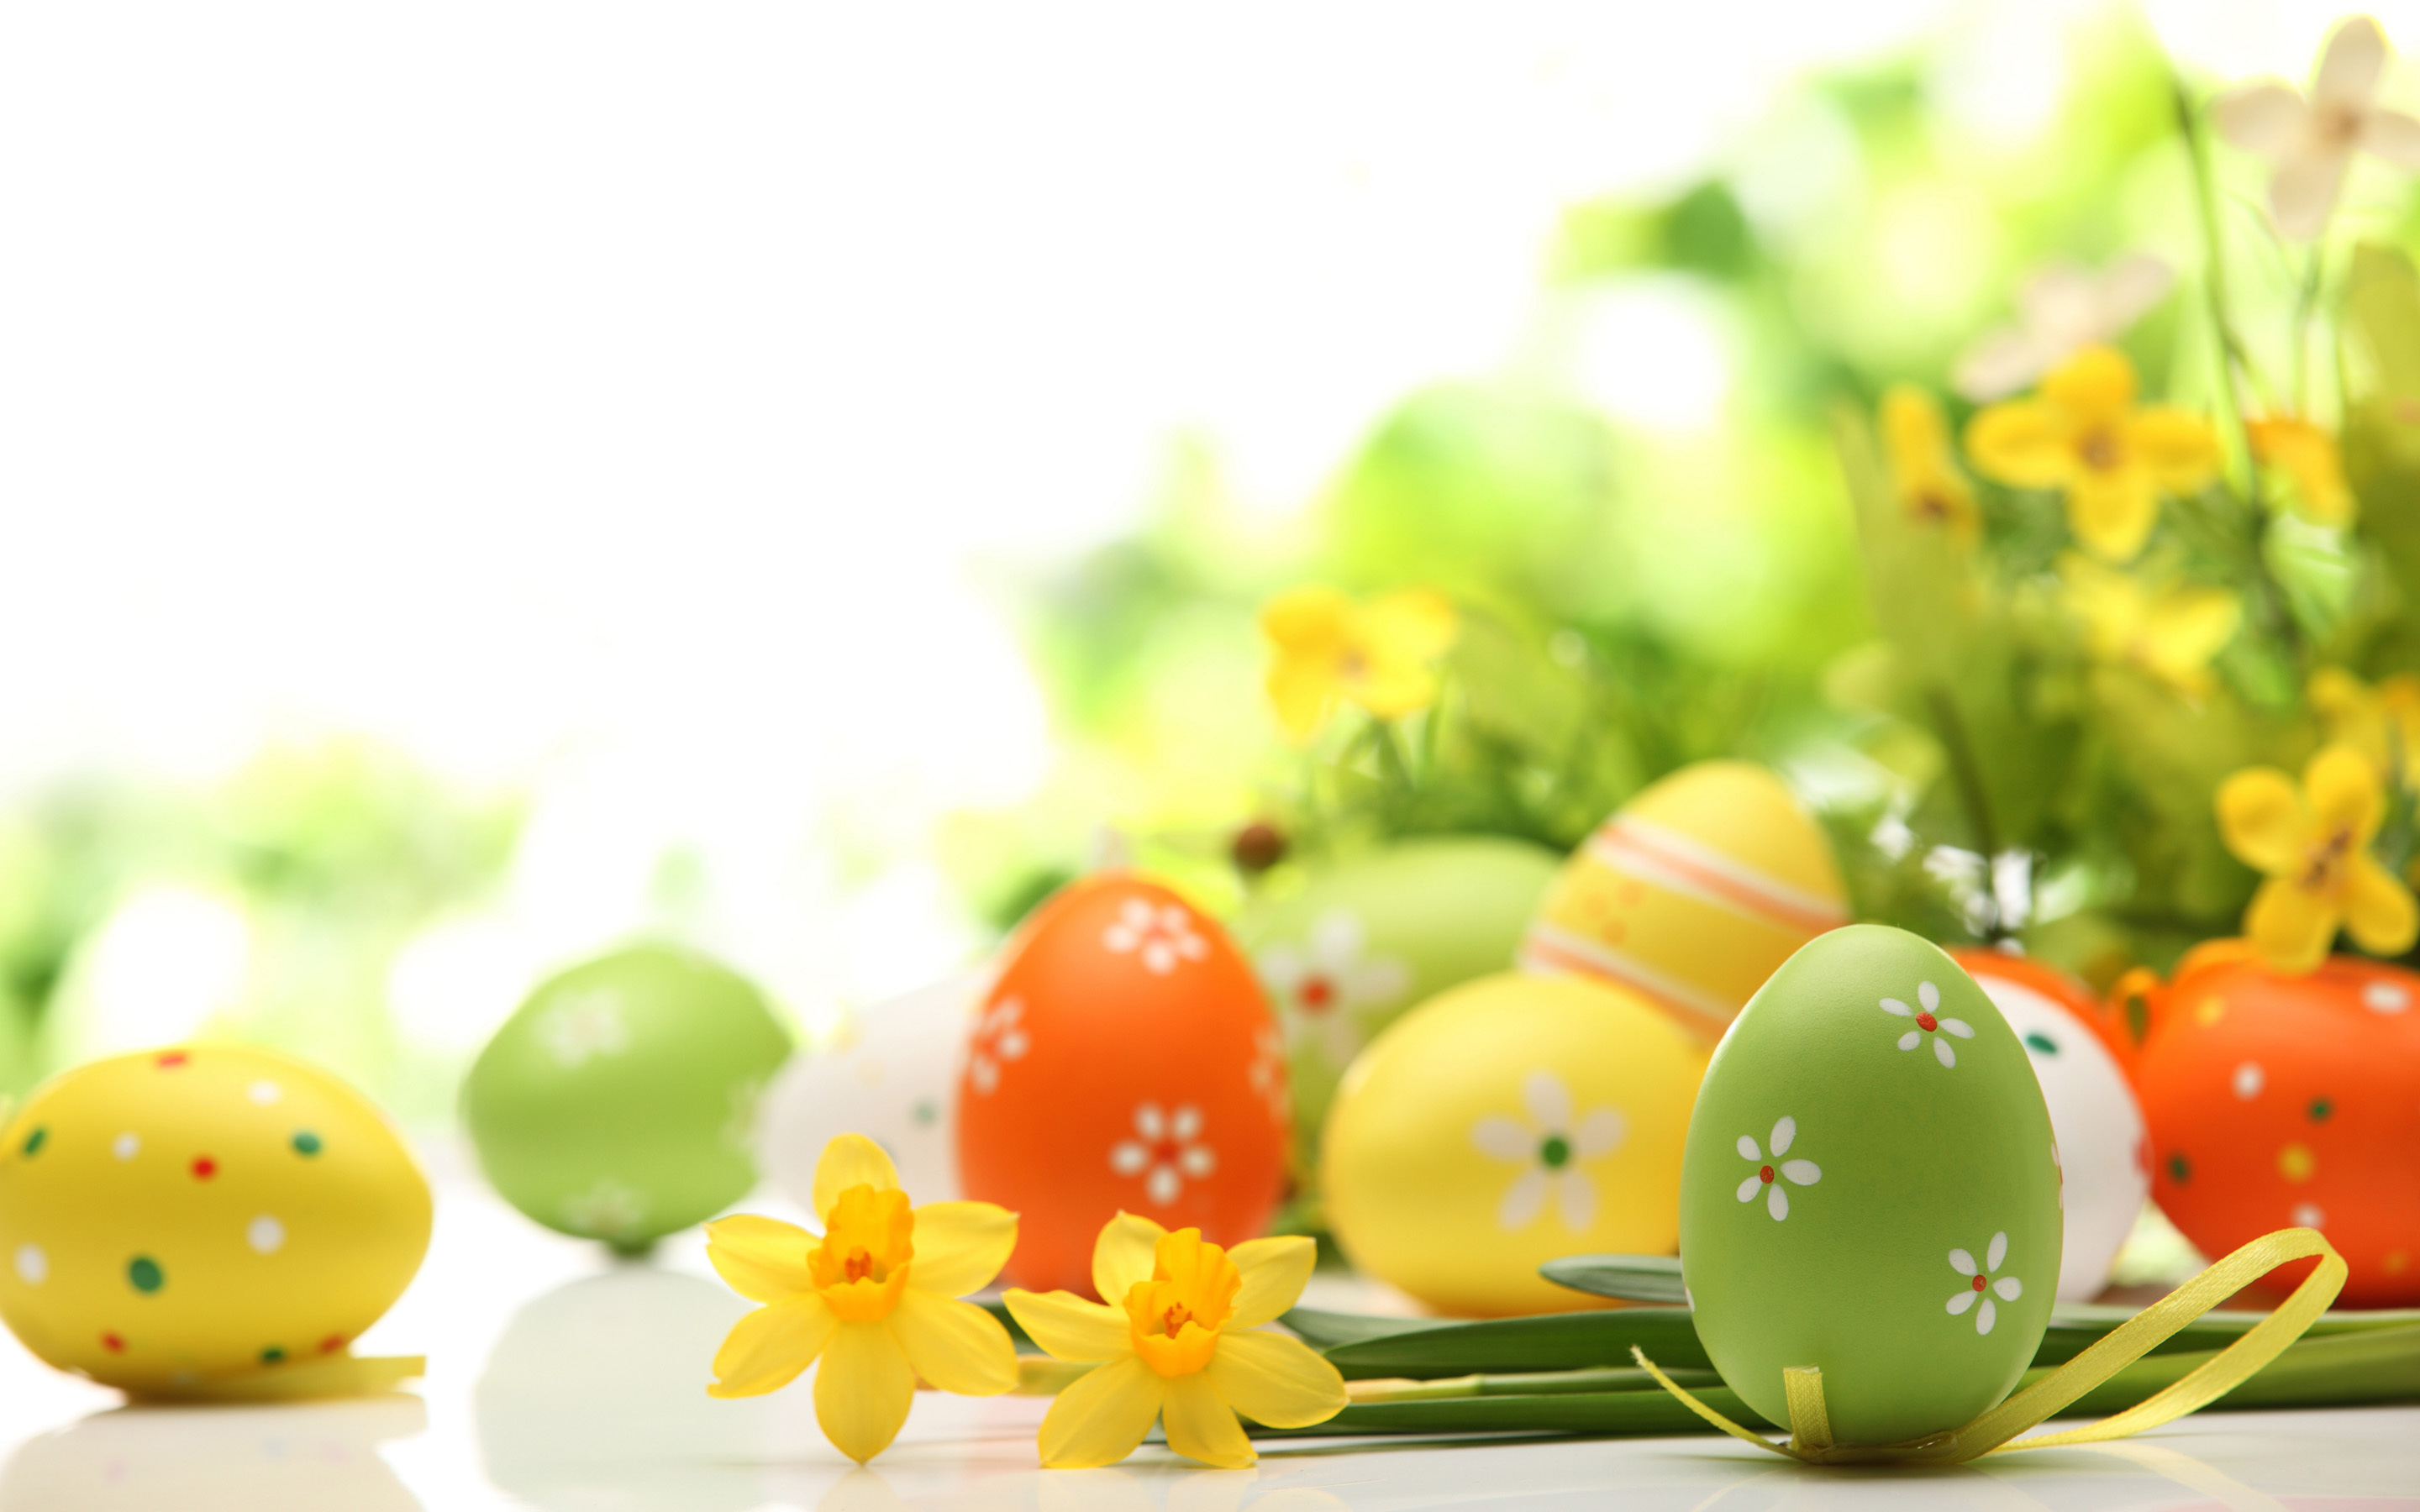 Top Rated Hqfx Easter Image Awesome Collection